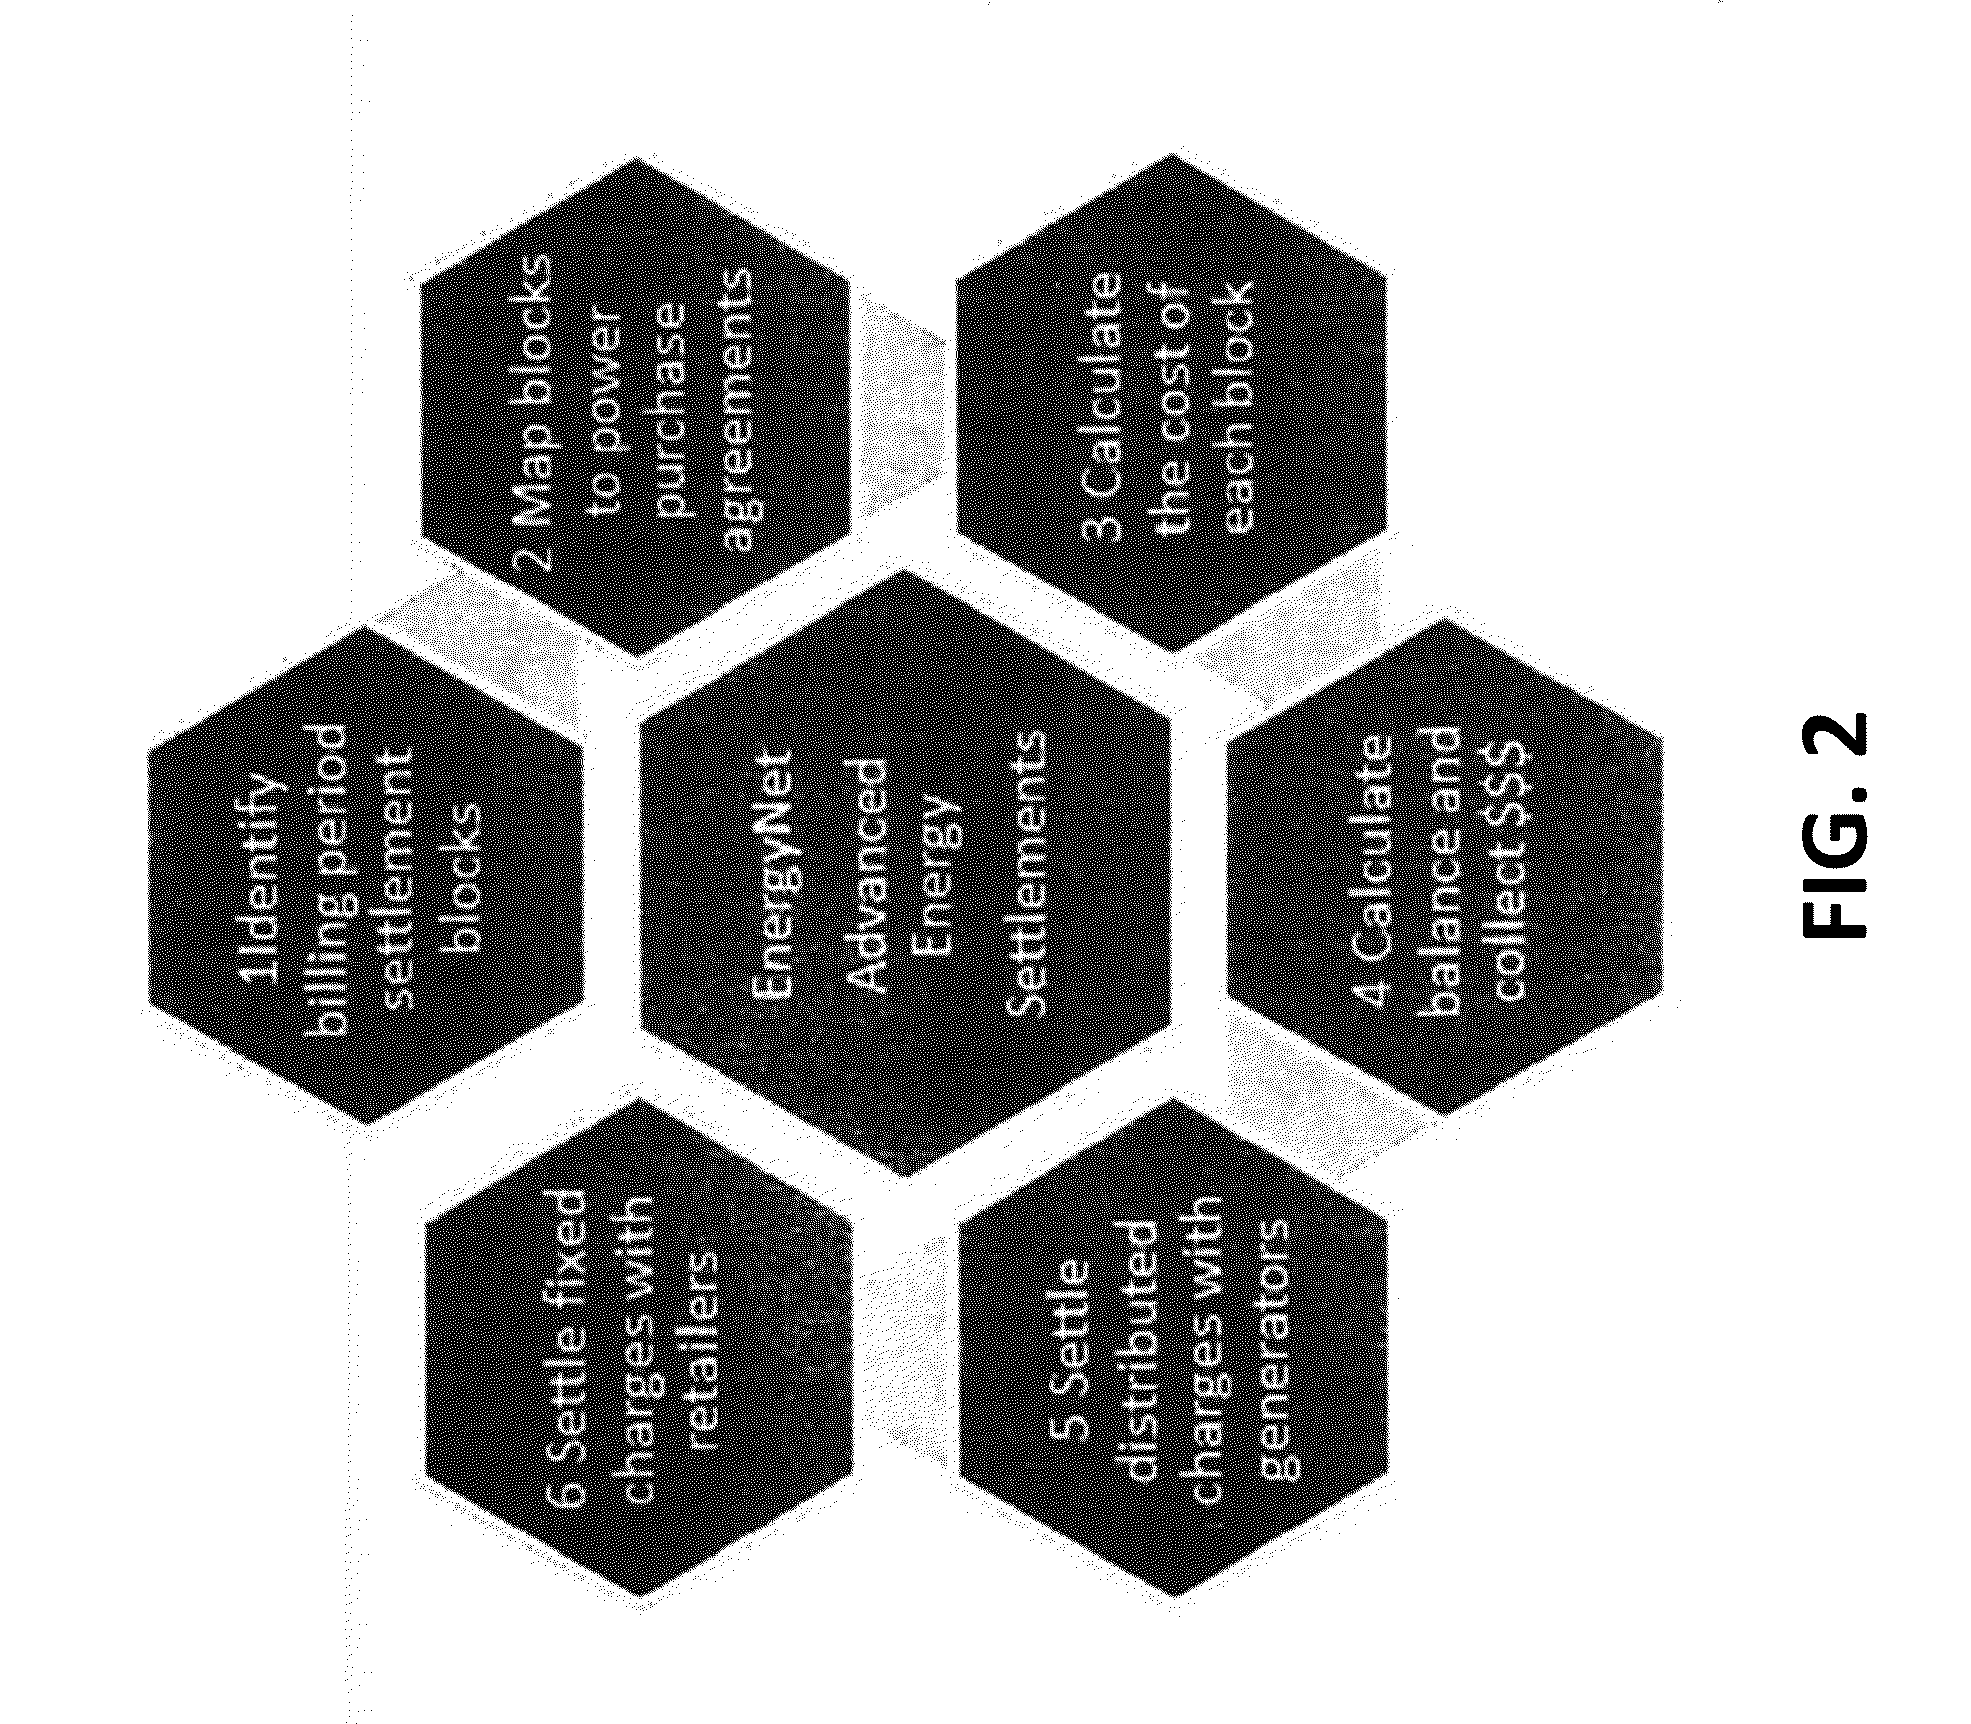 Systems and methods for advanced energy settlements, network-based messaging, and software applications for electric power grids, microgrids, grid elements, and/or electric power networks